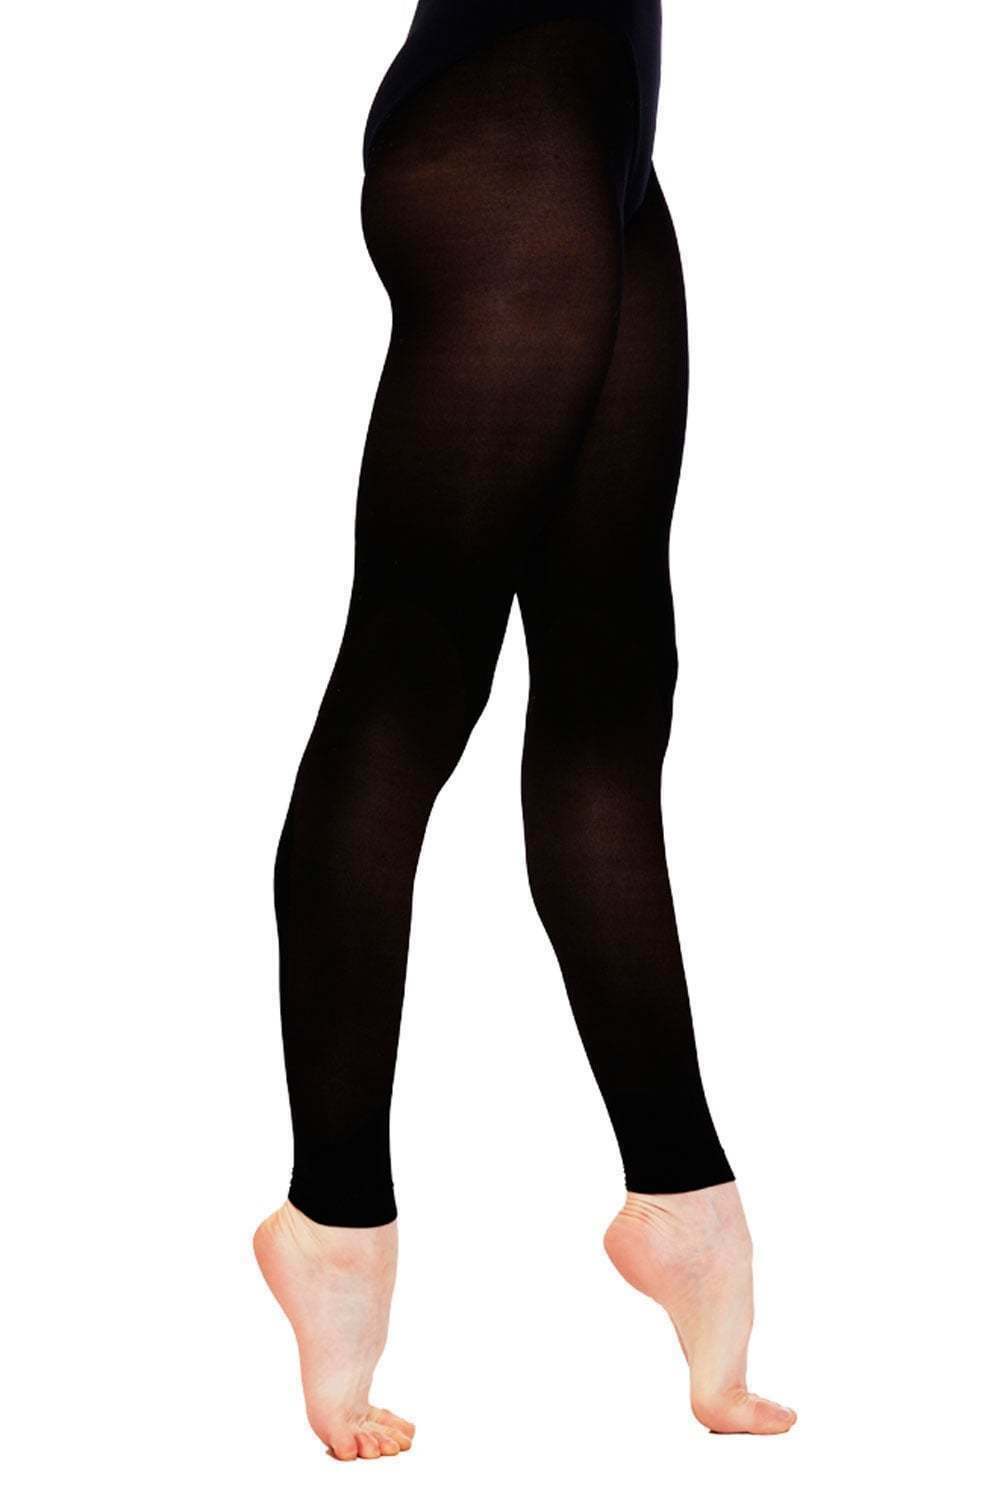 CHILDRENS GIRLS SILKY FOOTLESS DANCE TIGHTS IN BLACK - Hamtons Direct